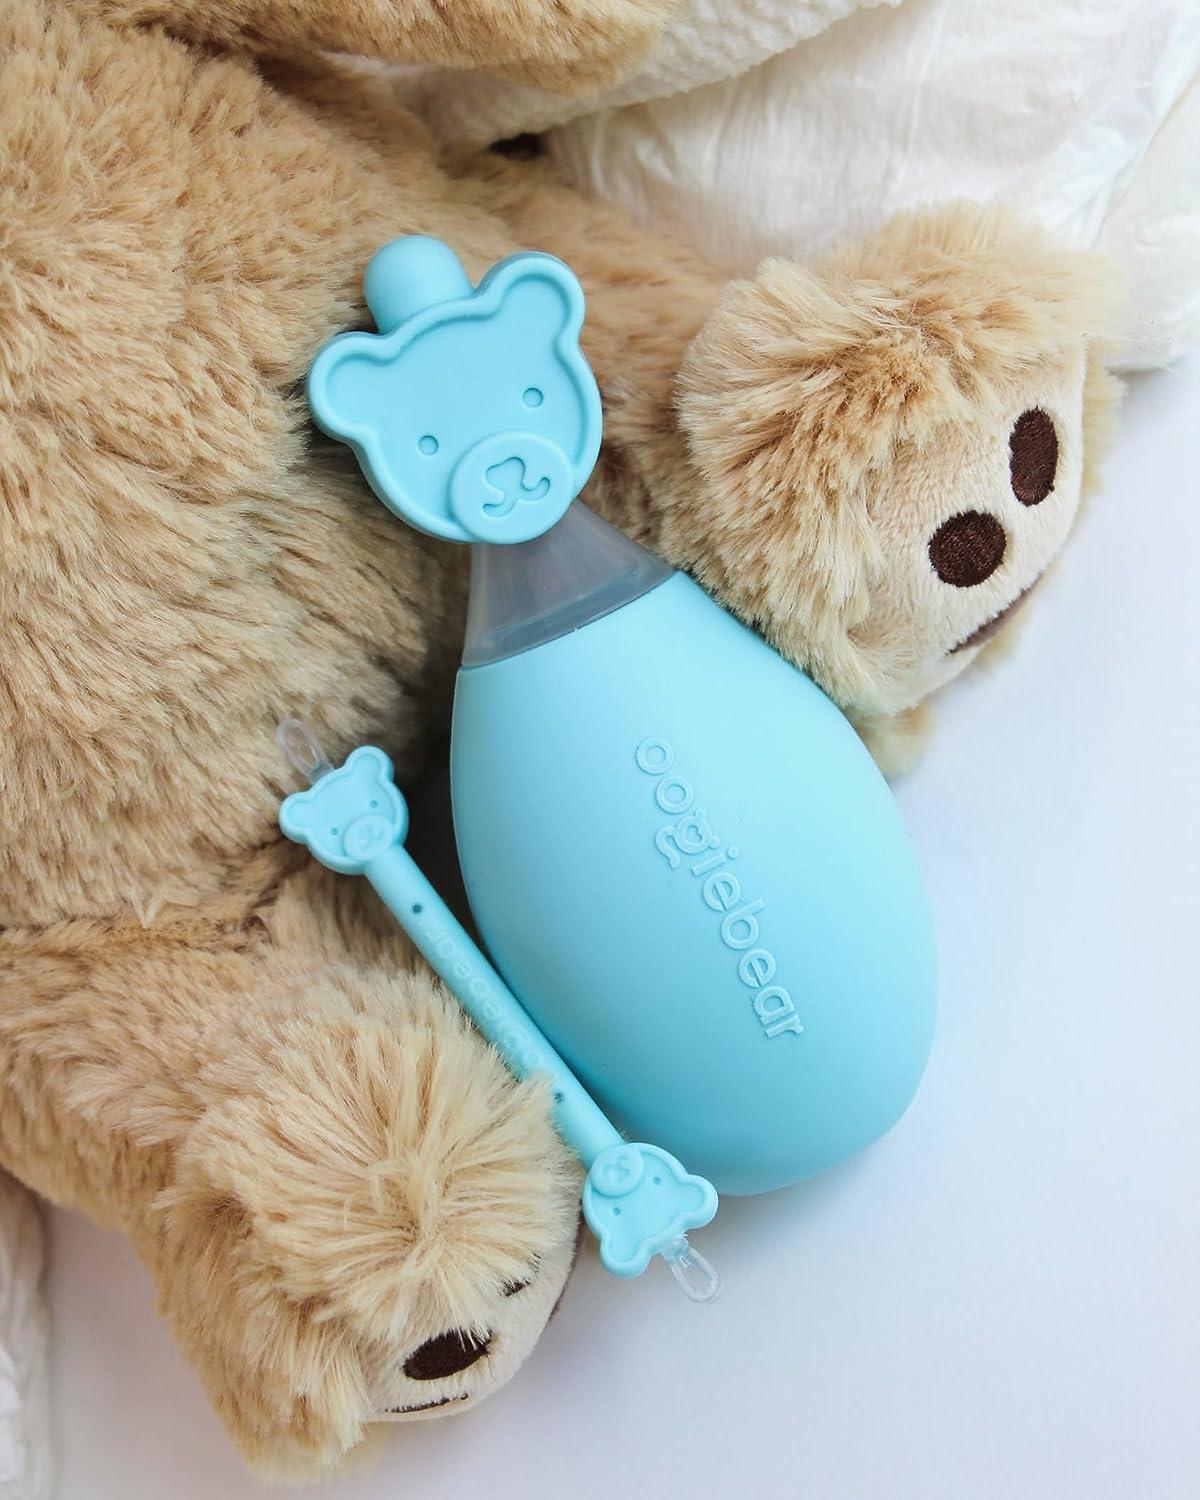 oogiebear Bear Pair — The Safe Baby Booger Cleaner and Nose Sucker Duo |  Bulb Aspirator and 2-in-1 Nose and Ear Wax Cleaner | Latex and BPA Free 